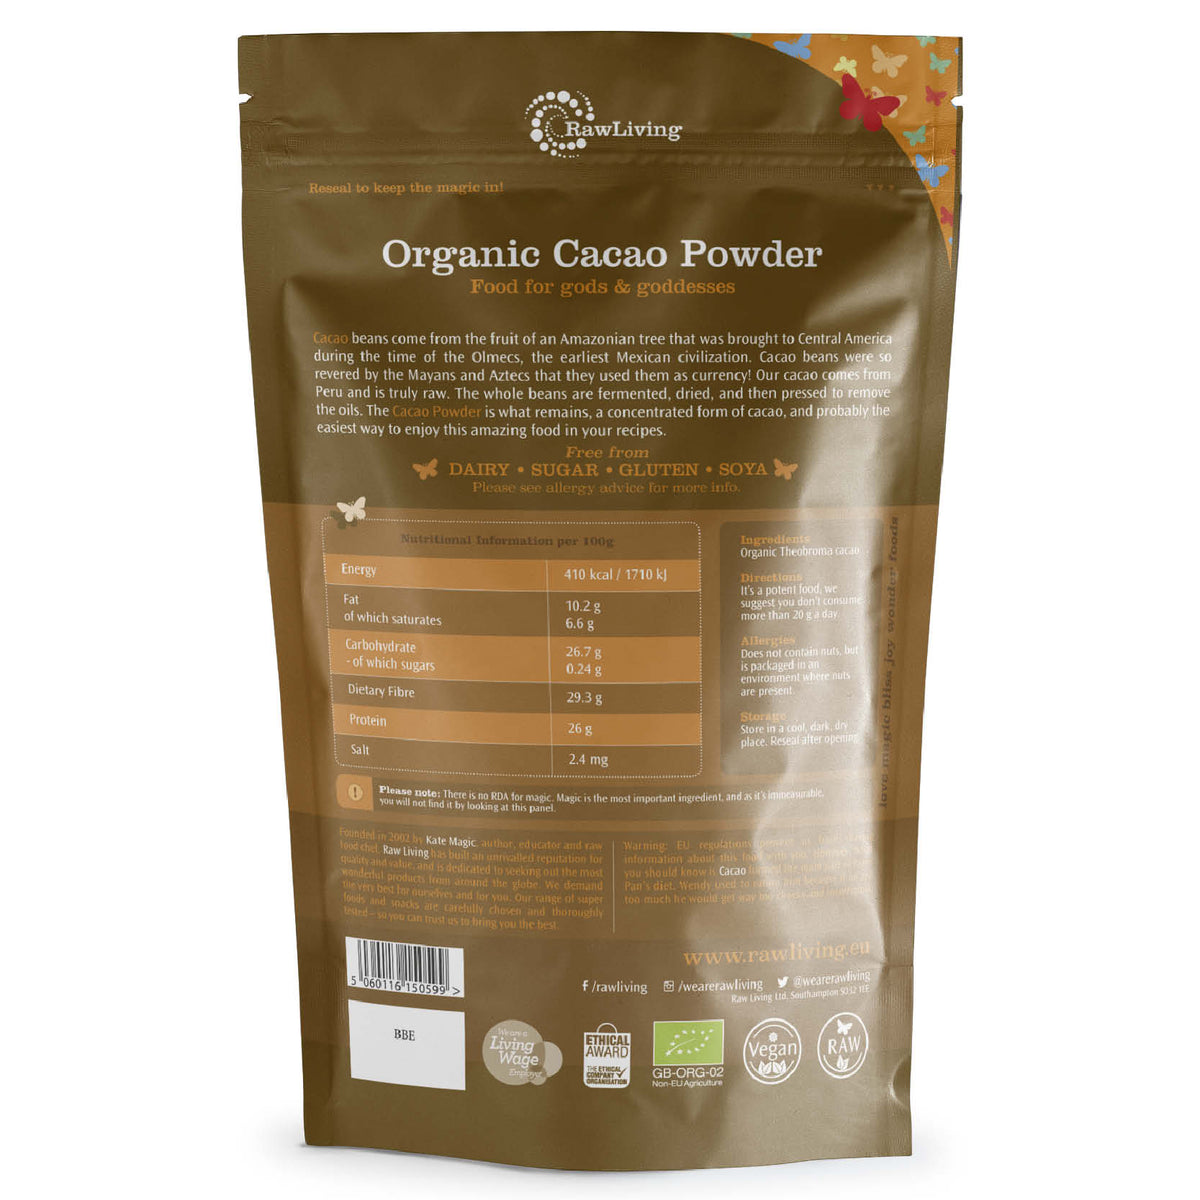 Organic Cacao Powder | Raw Living UK | Super Foods | Raw Living Cacao Powder: the easiest way to use cacao when making chocolate. Just add a spoonful to sweets, desserts, or smoothies for a delicious flavour.